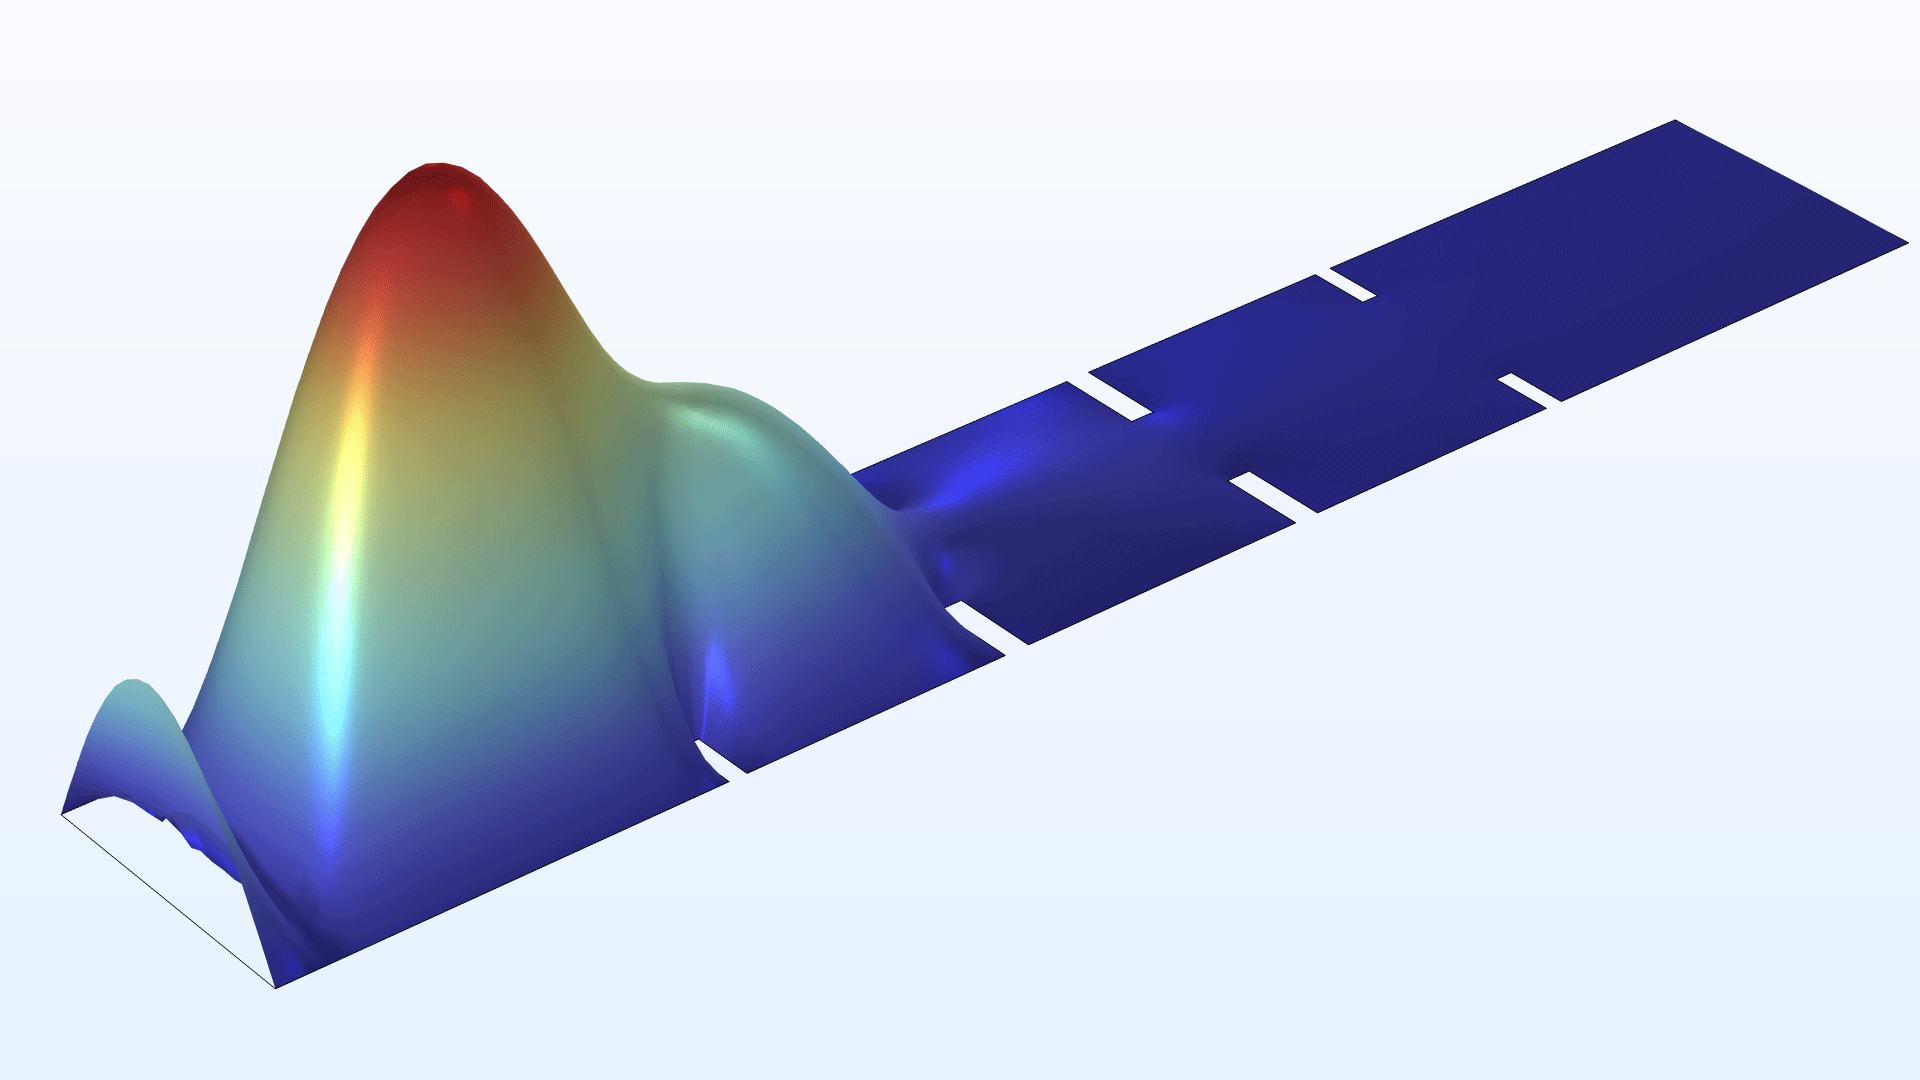 An RF bandpass filter in the Rainbow Light color table.